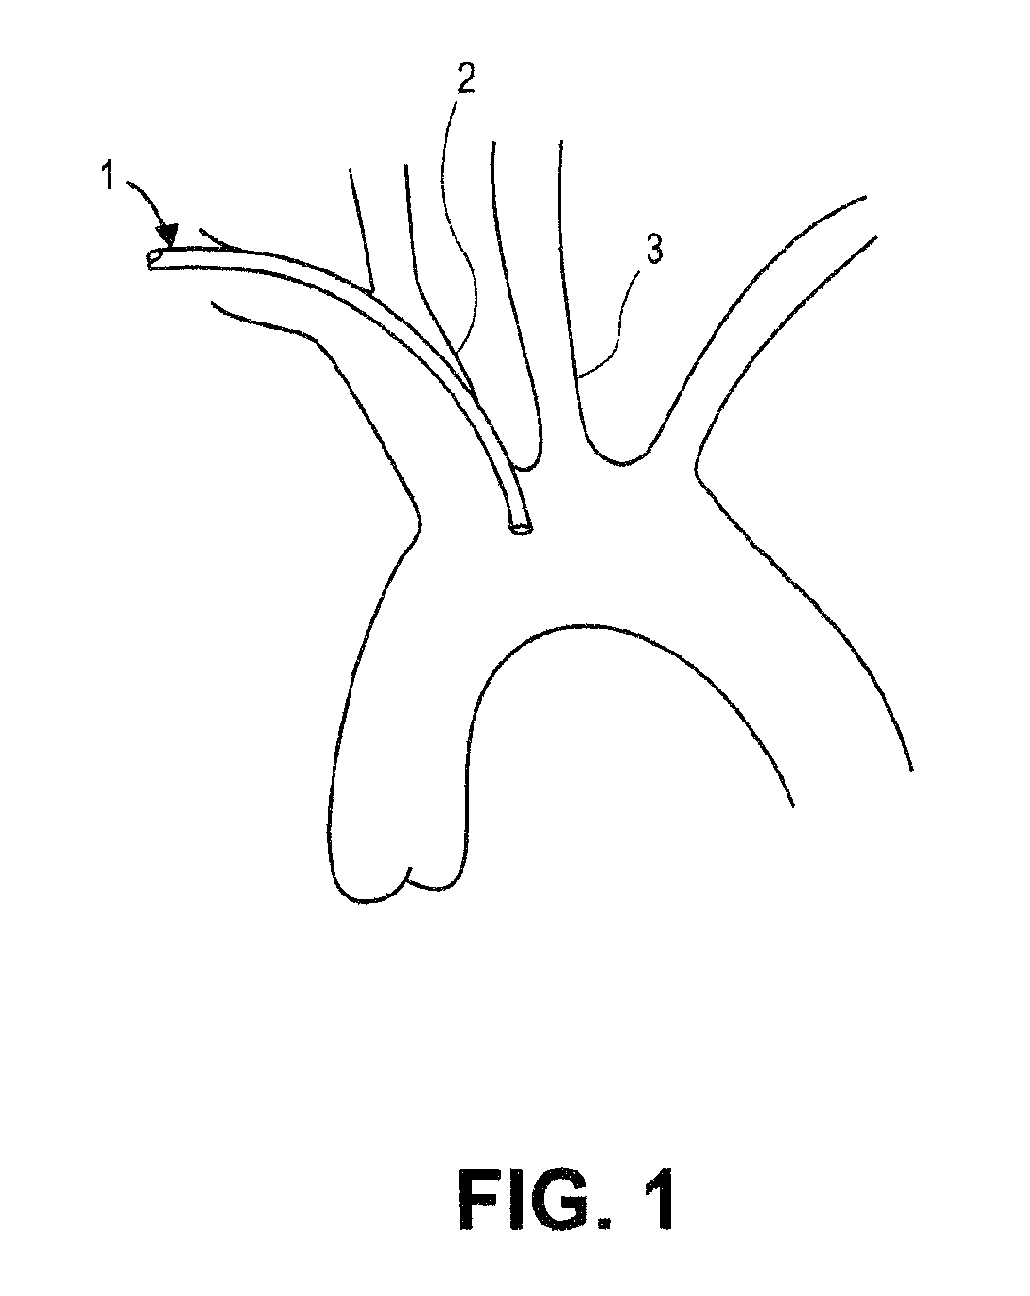 Method of accessing the left common carotid artery